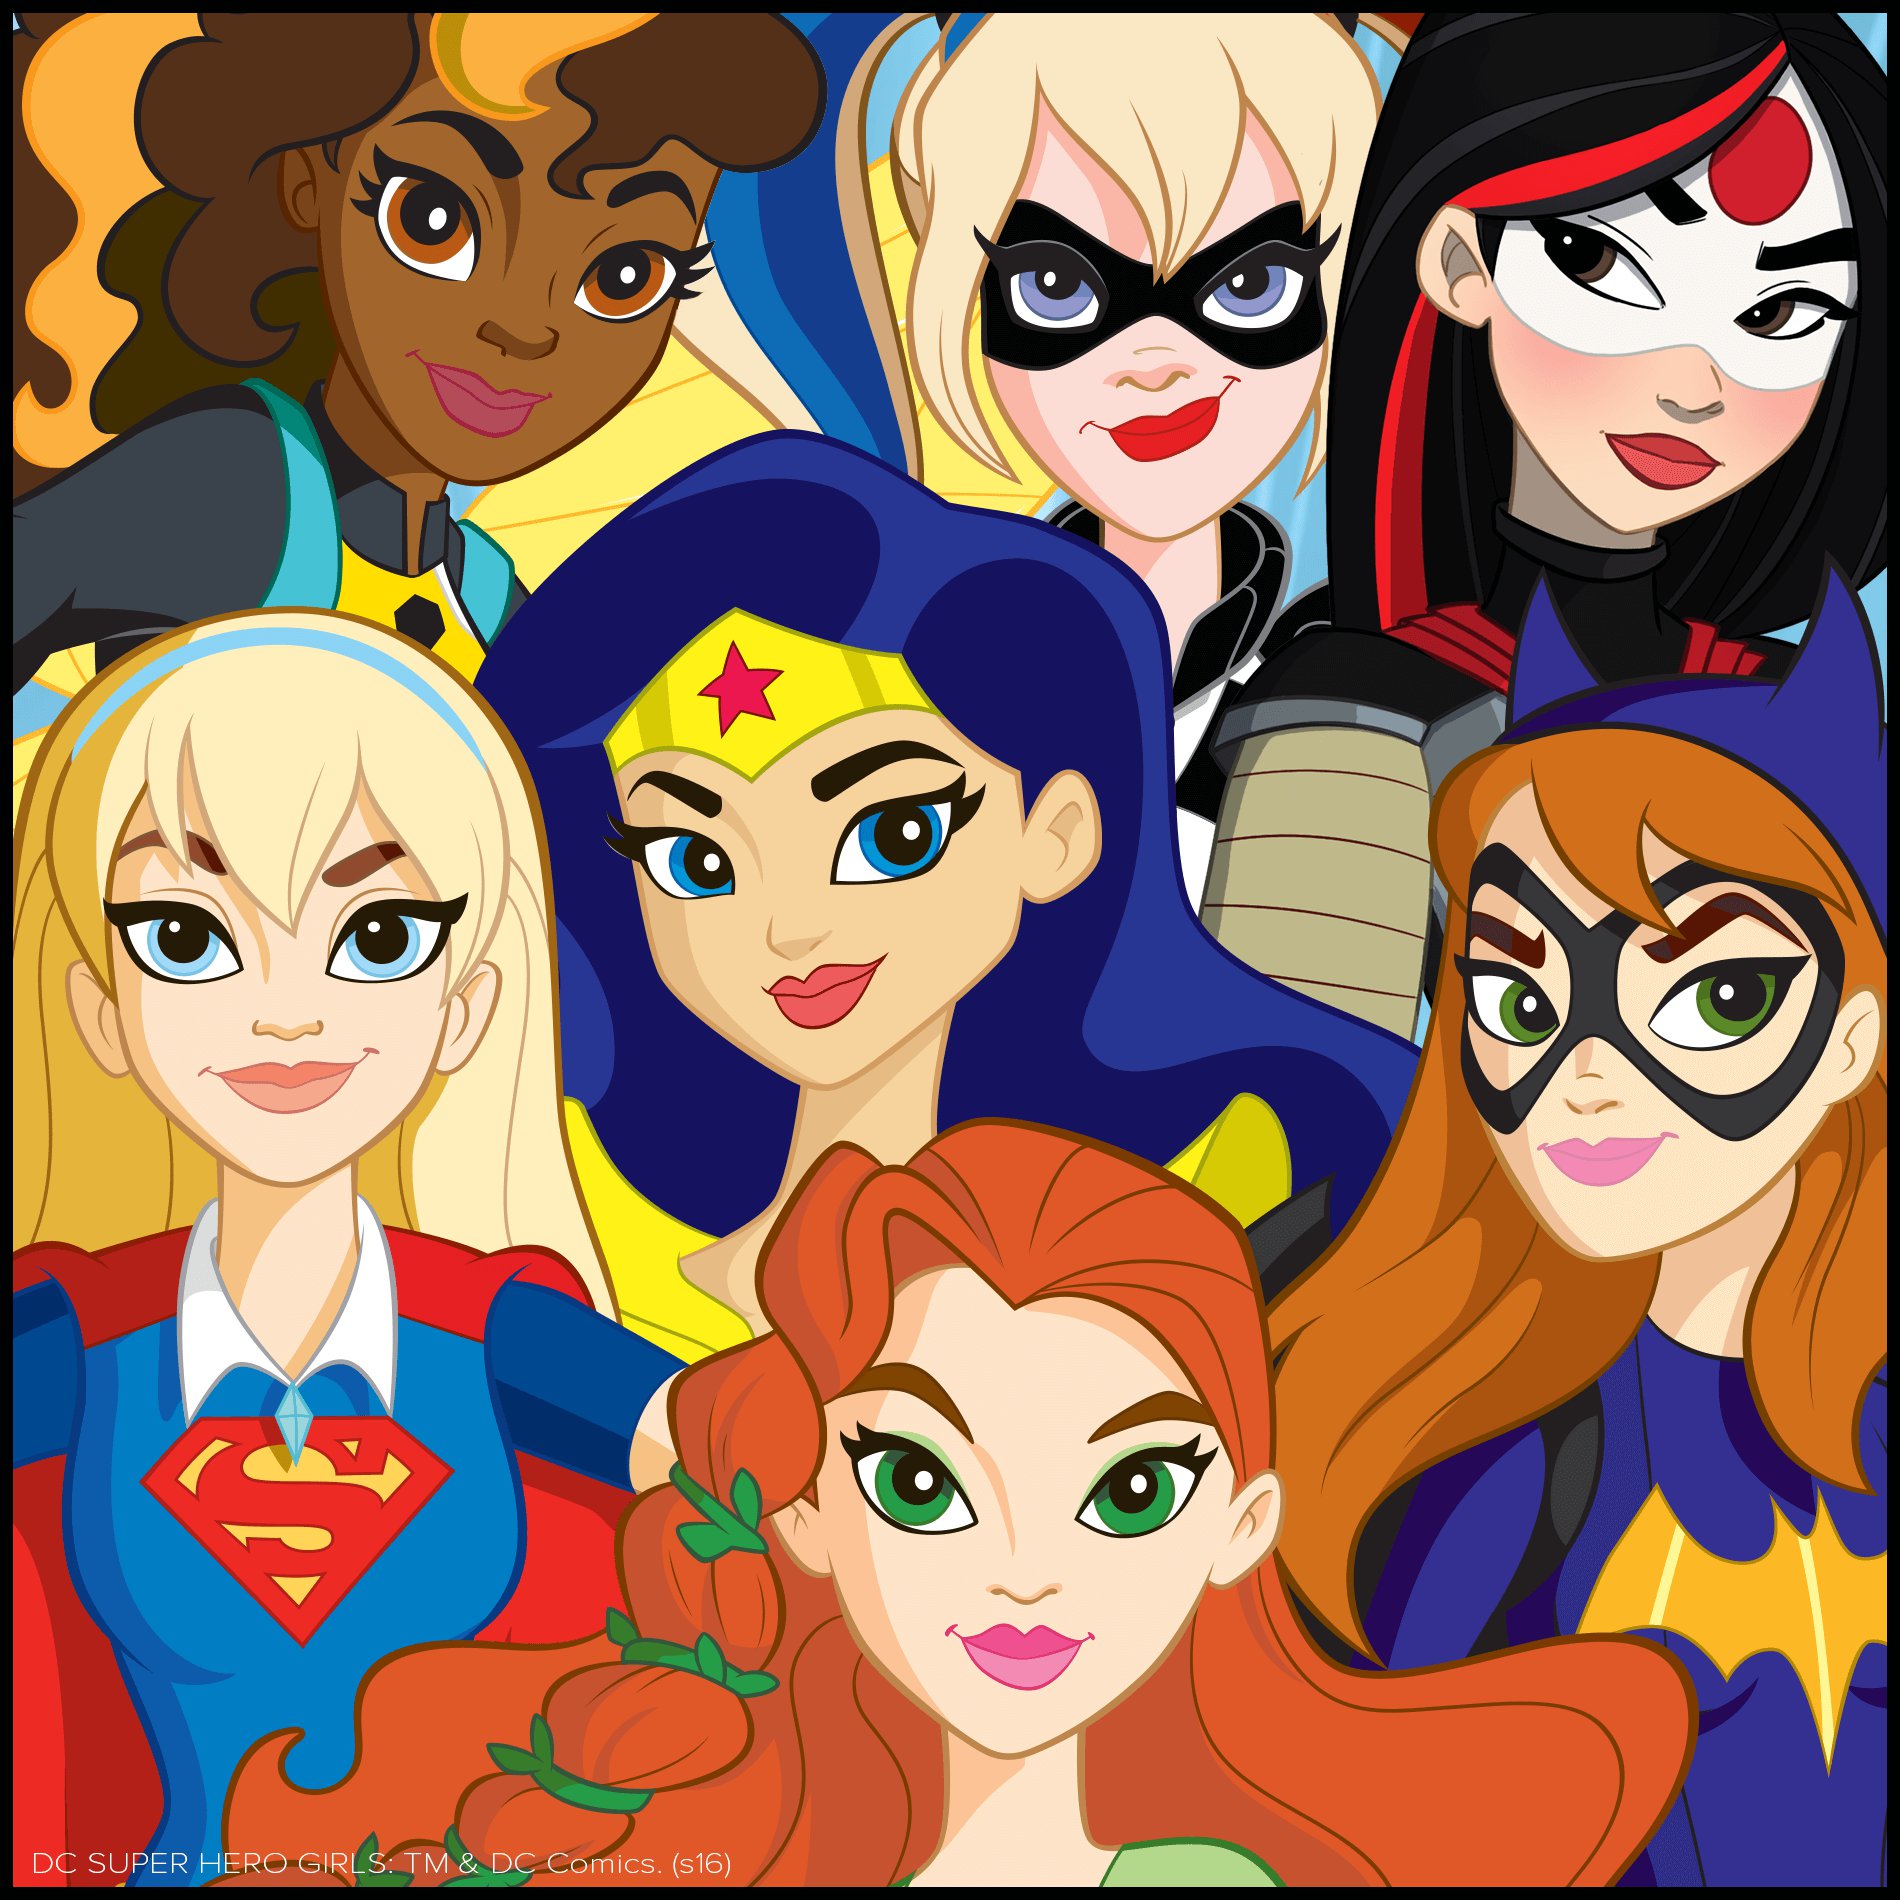 DC Super Hero Girls Gets a New Series From Cartoon Network | The Mary Sue